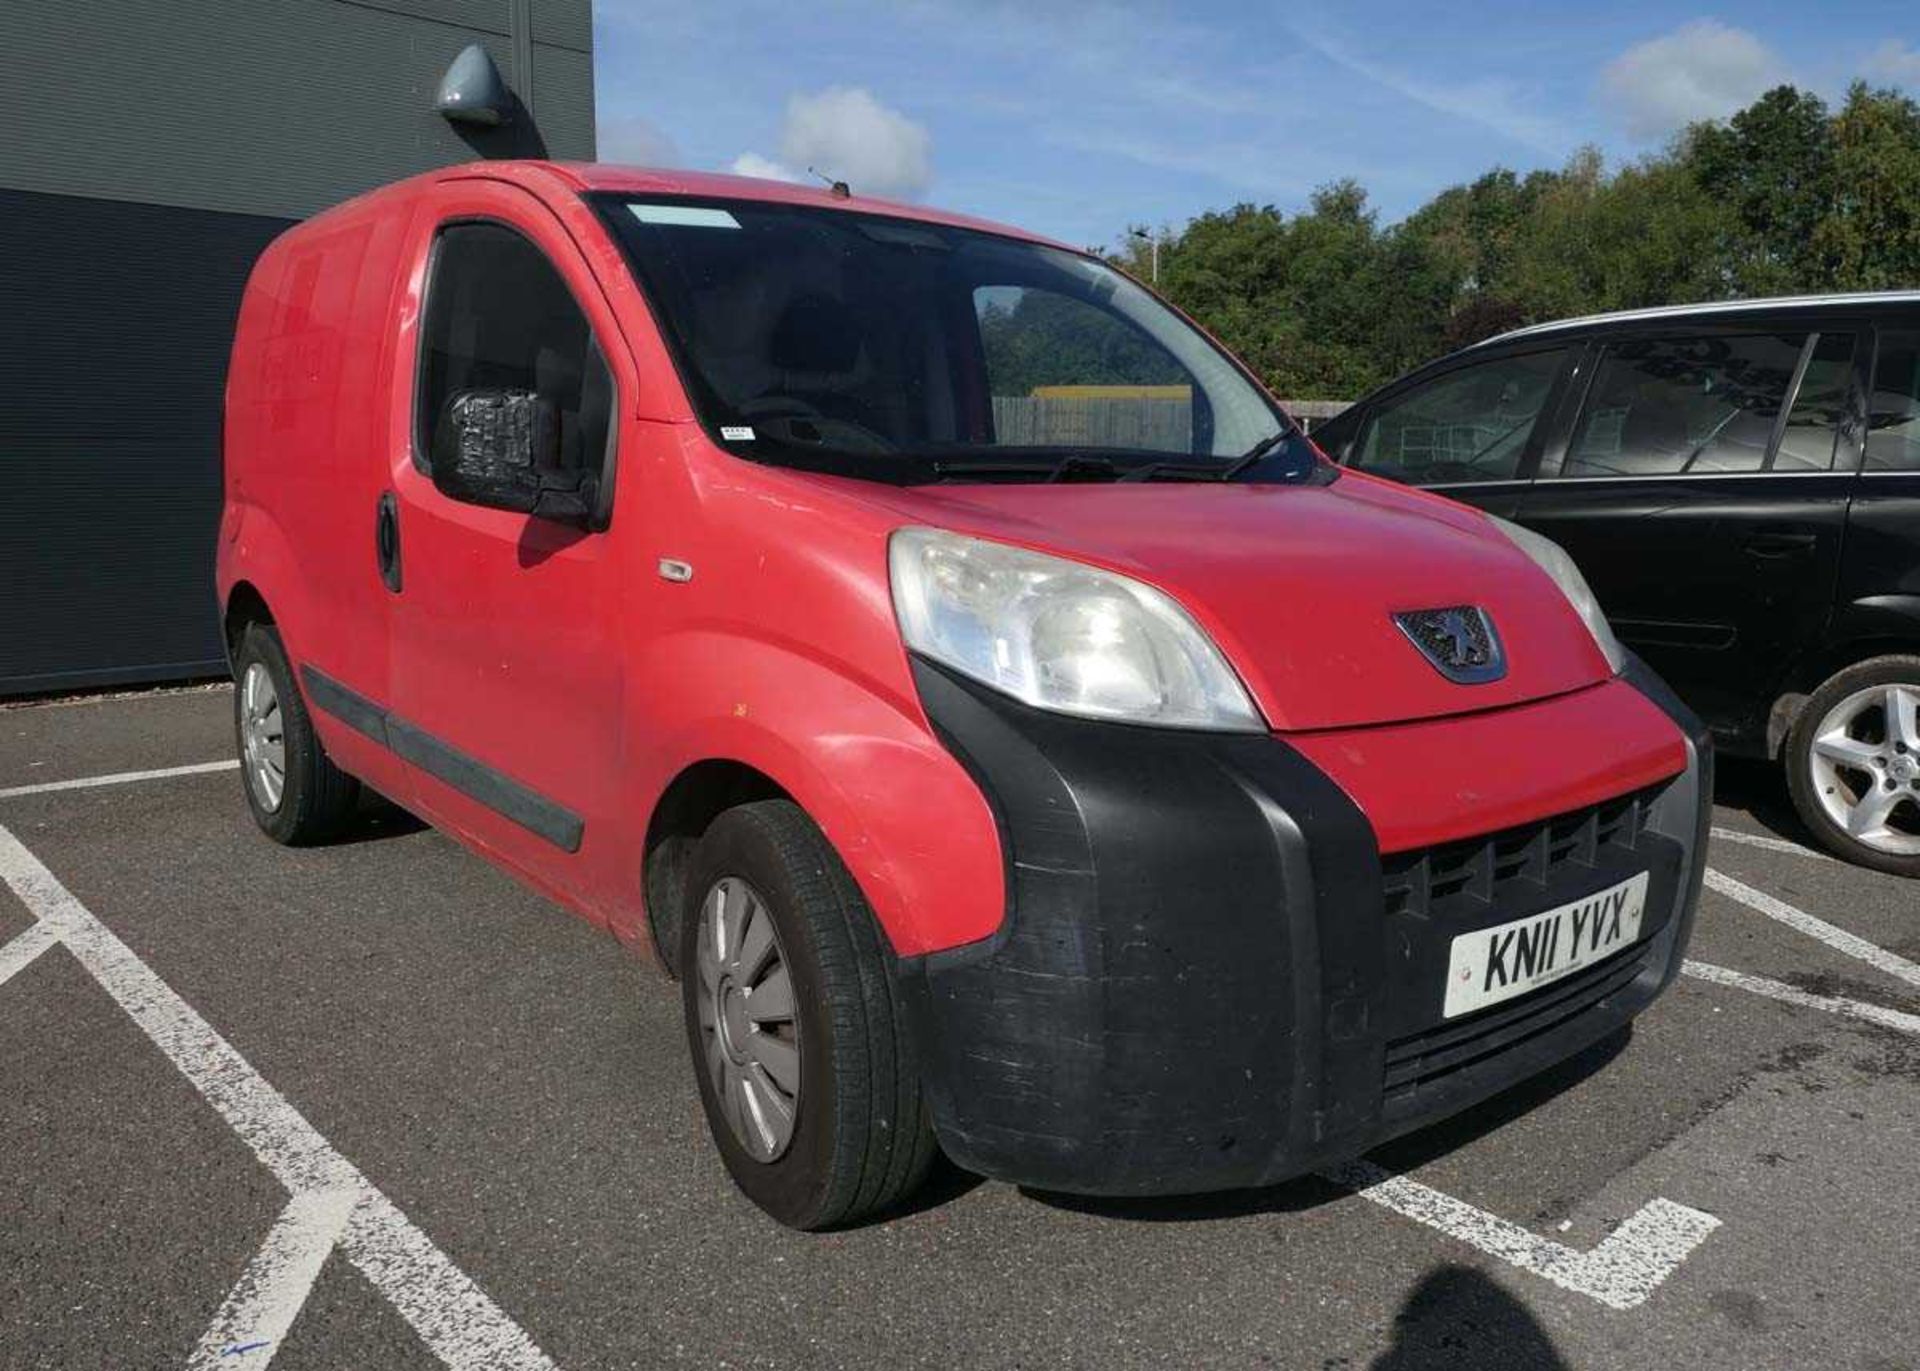 KN11 YVX Peugeot Bipper S HDI Panel Van in red, first registered 25/05/2011, 1399 cc diesel, mileage